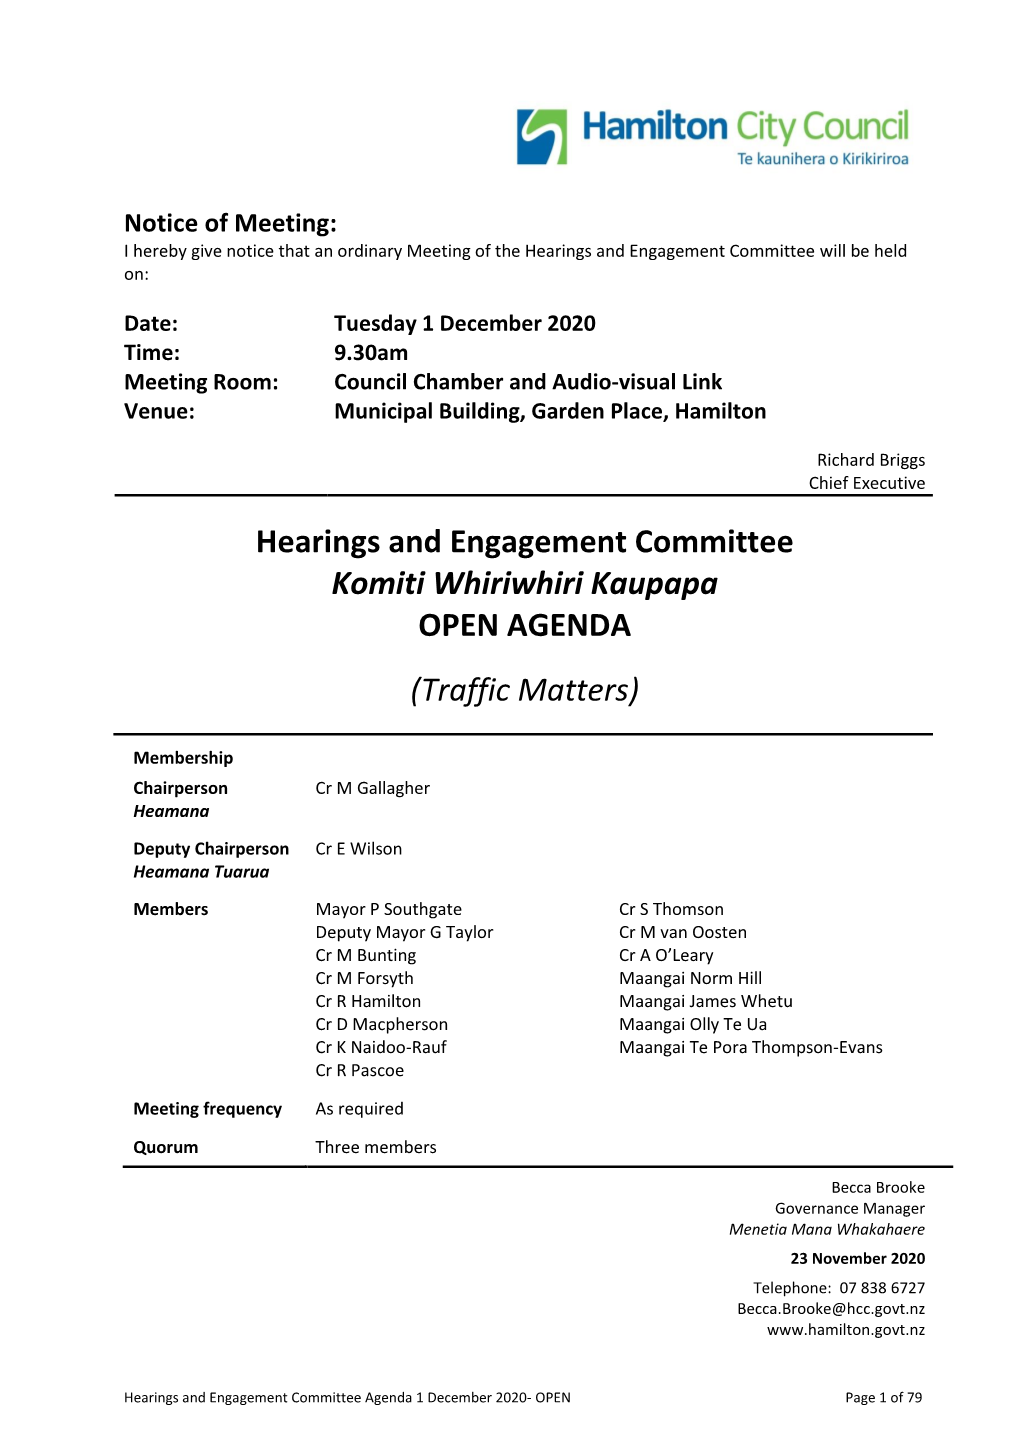 Agenda of Ordinary Hearings and Engagement Committee